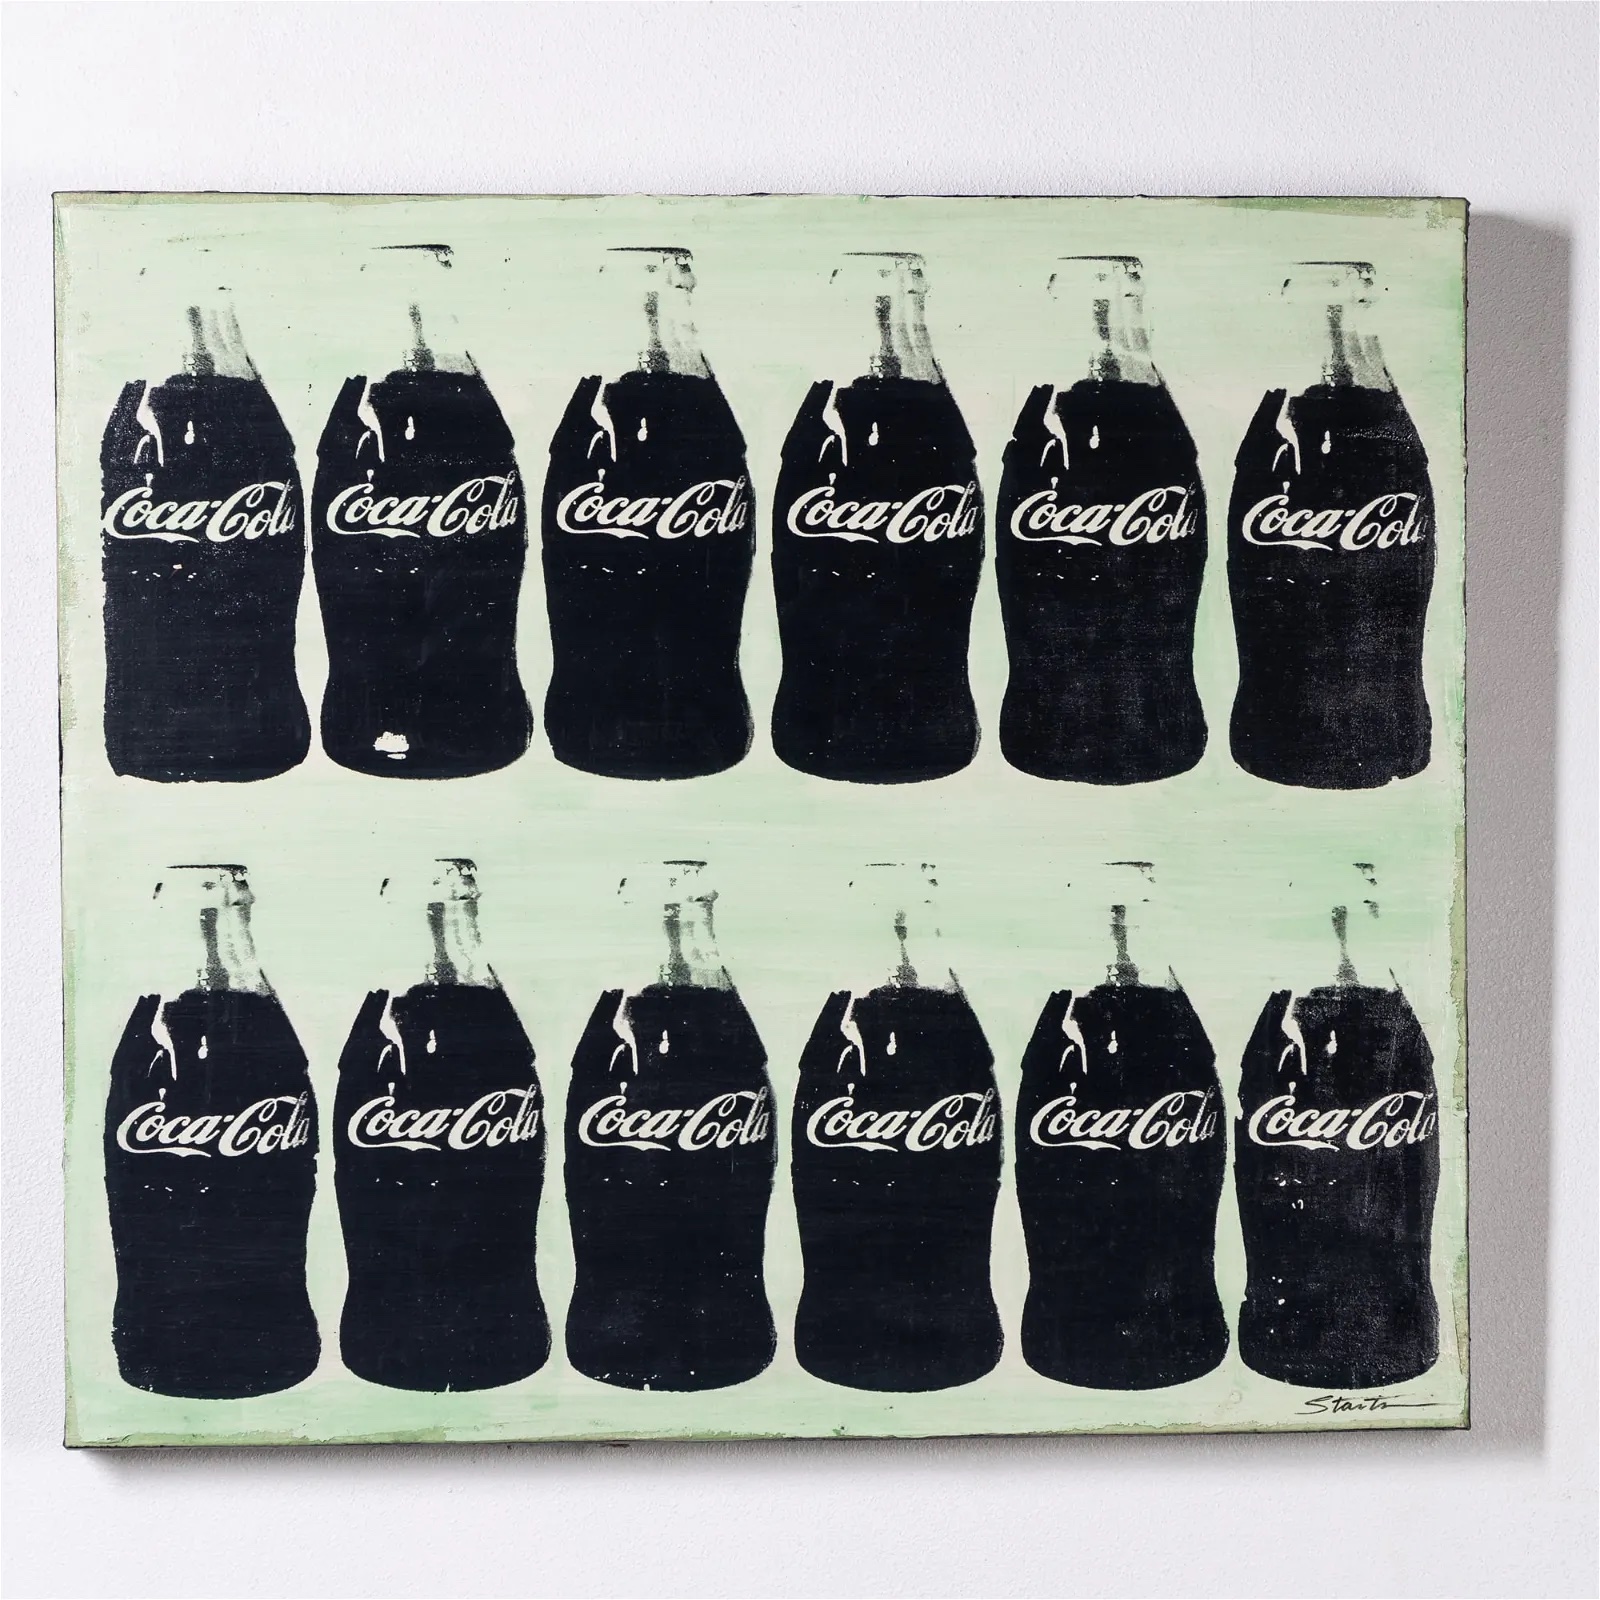 Jackie Stanton, 'Coco-Cola Bottles,' estimated at $10-$100,000 at Abell.